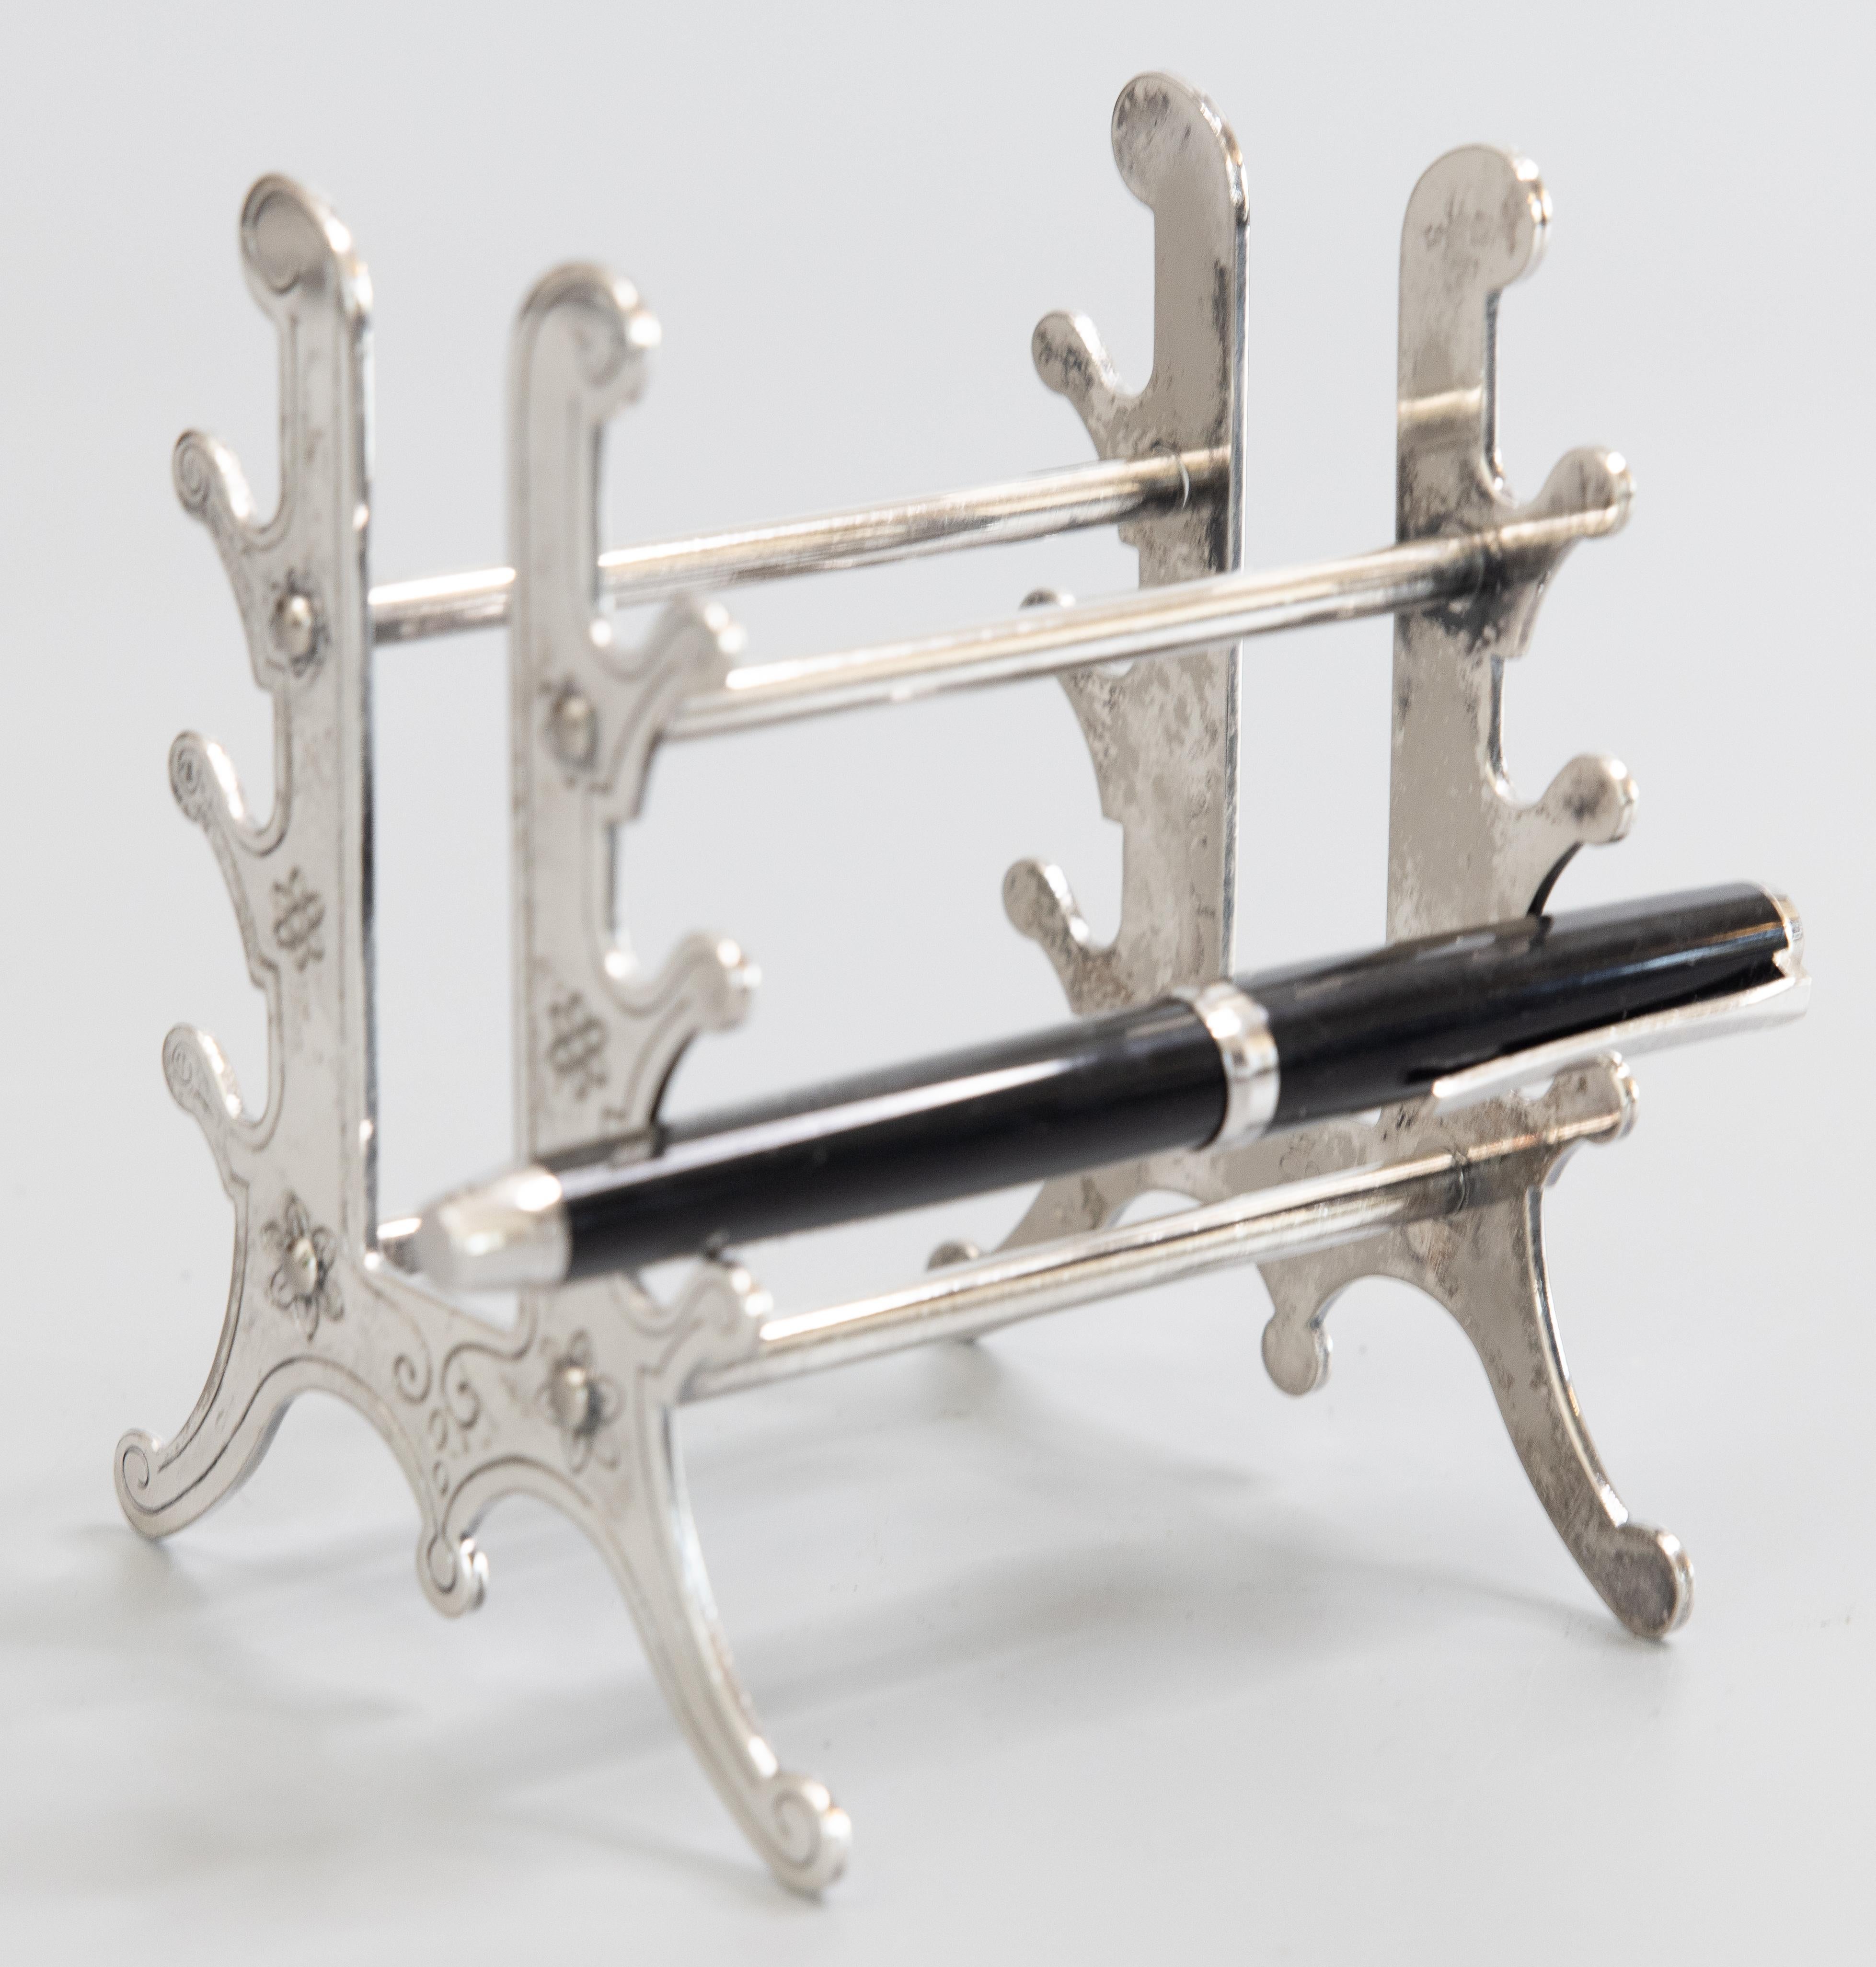 A lovely Italian silverplated pen rack stand with a scrolling design and delicate flowers. Makers mark for El De Uberti Italy. It would be a fabulous addition to a desk and also make a wonderful gift.

DIMENSIONS
3.6